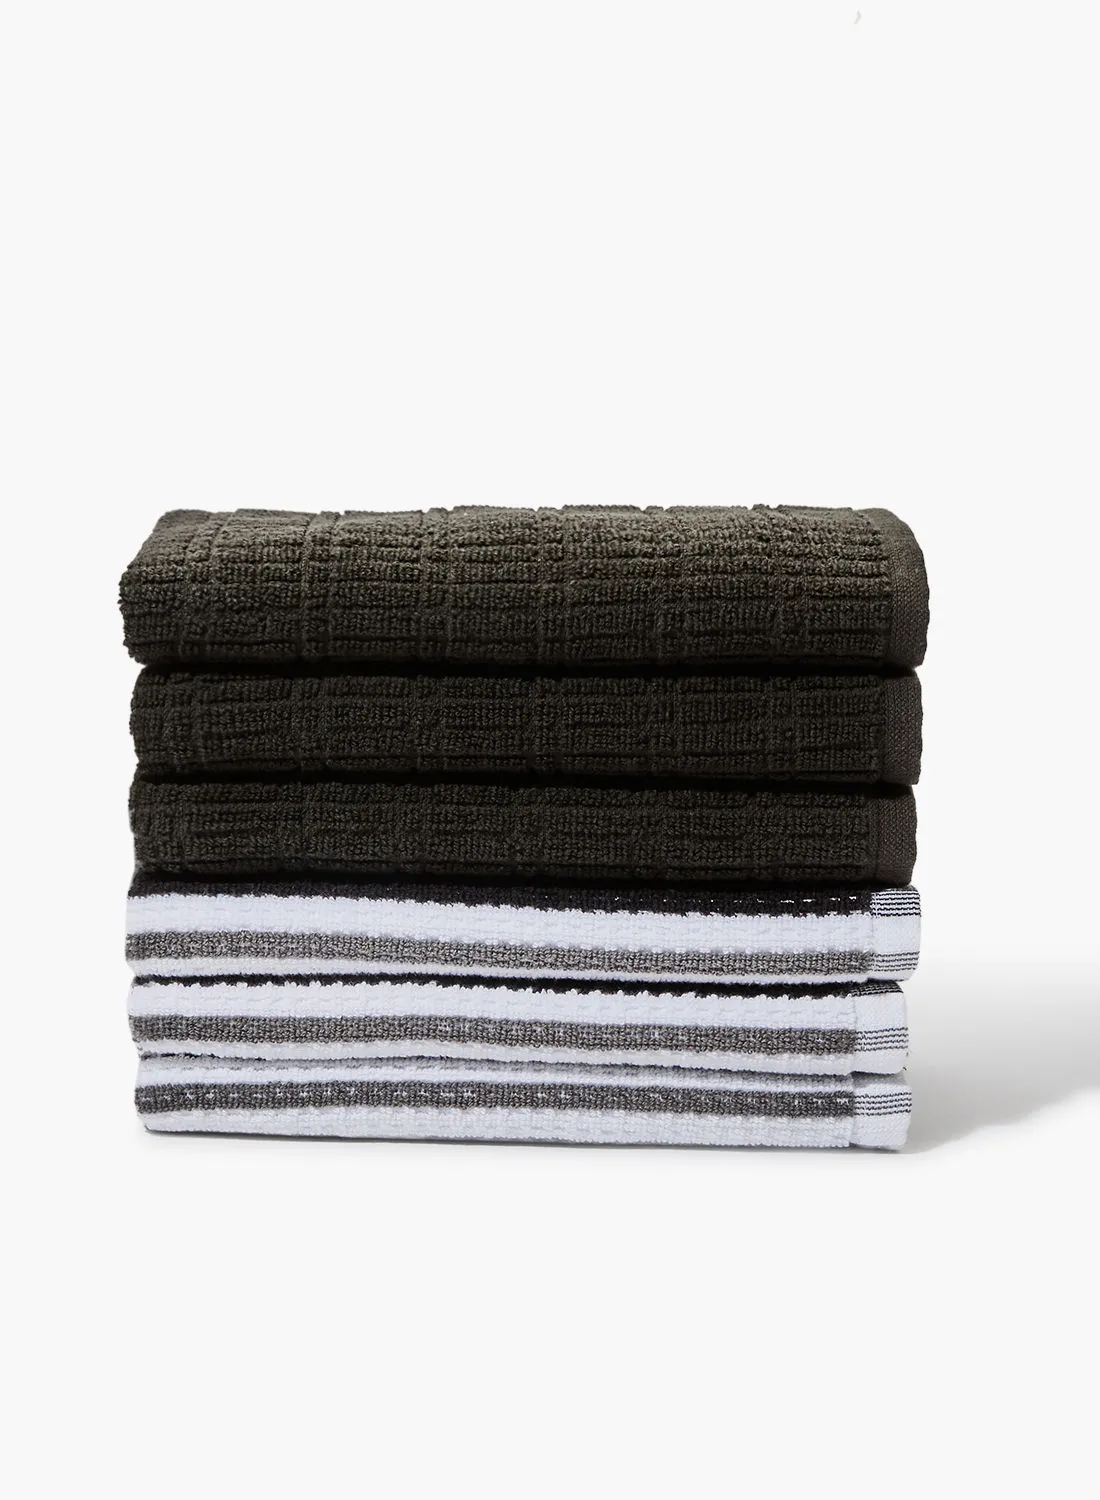 Amal 6 Pack Bathroom Towel Set - 393 GSM 100% Cotton Solid And Yarn Dyed - Black_White Color -Quick Dry - Super Absorbent